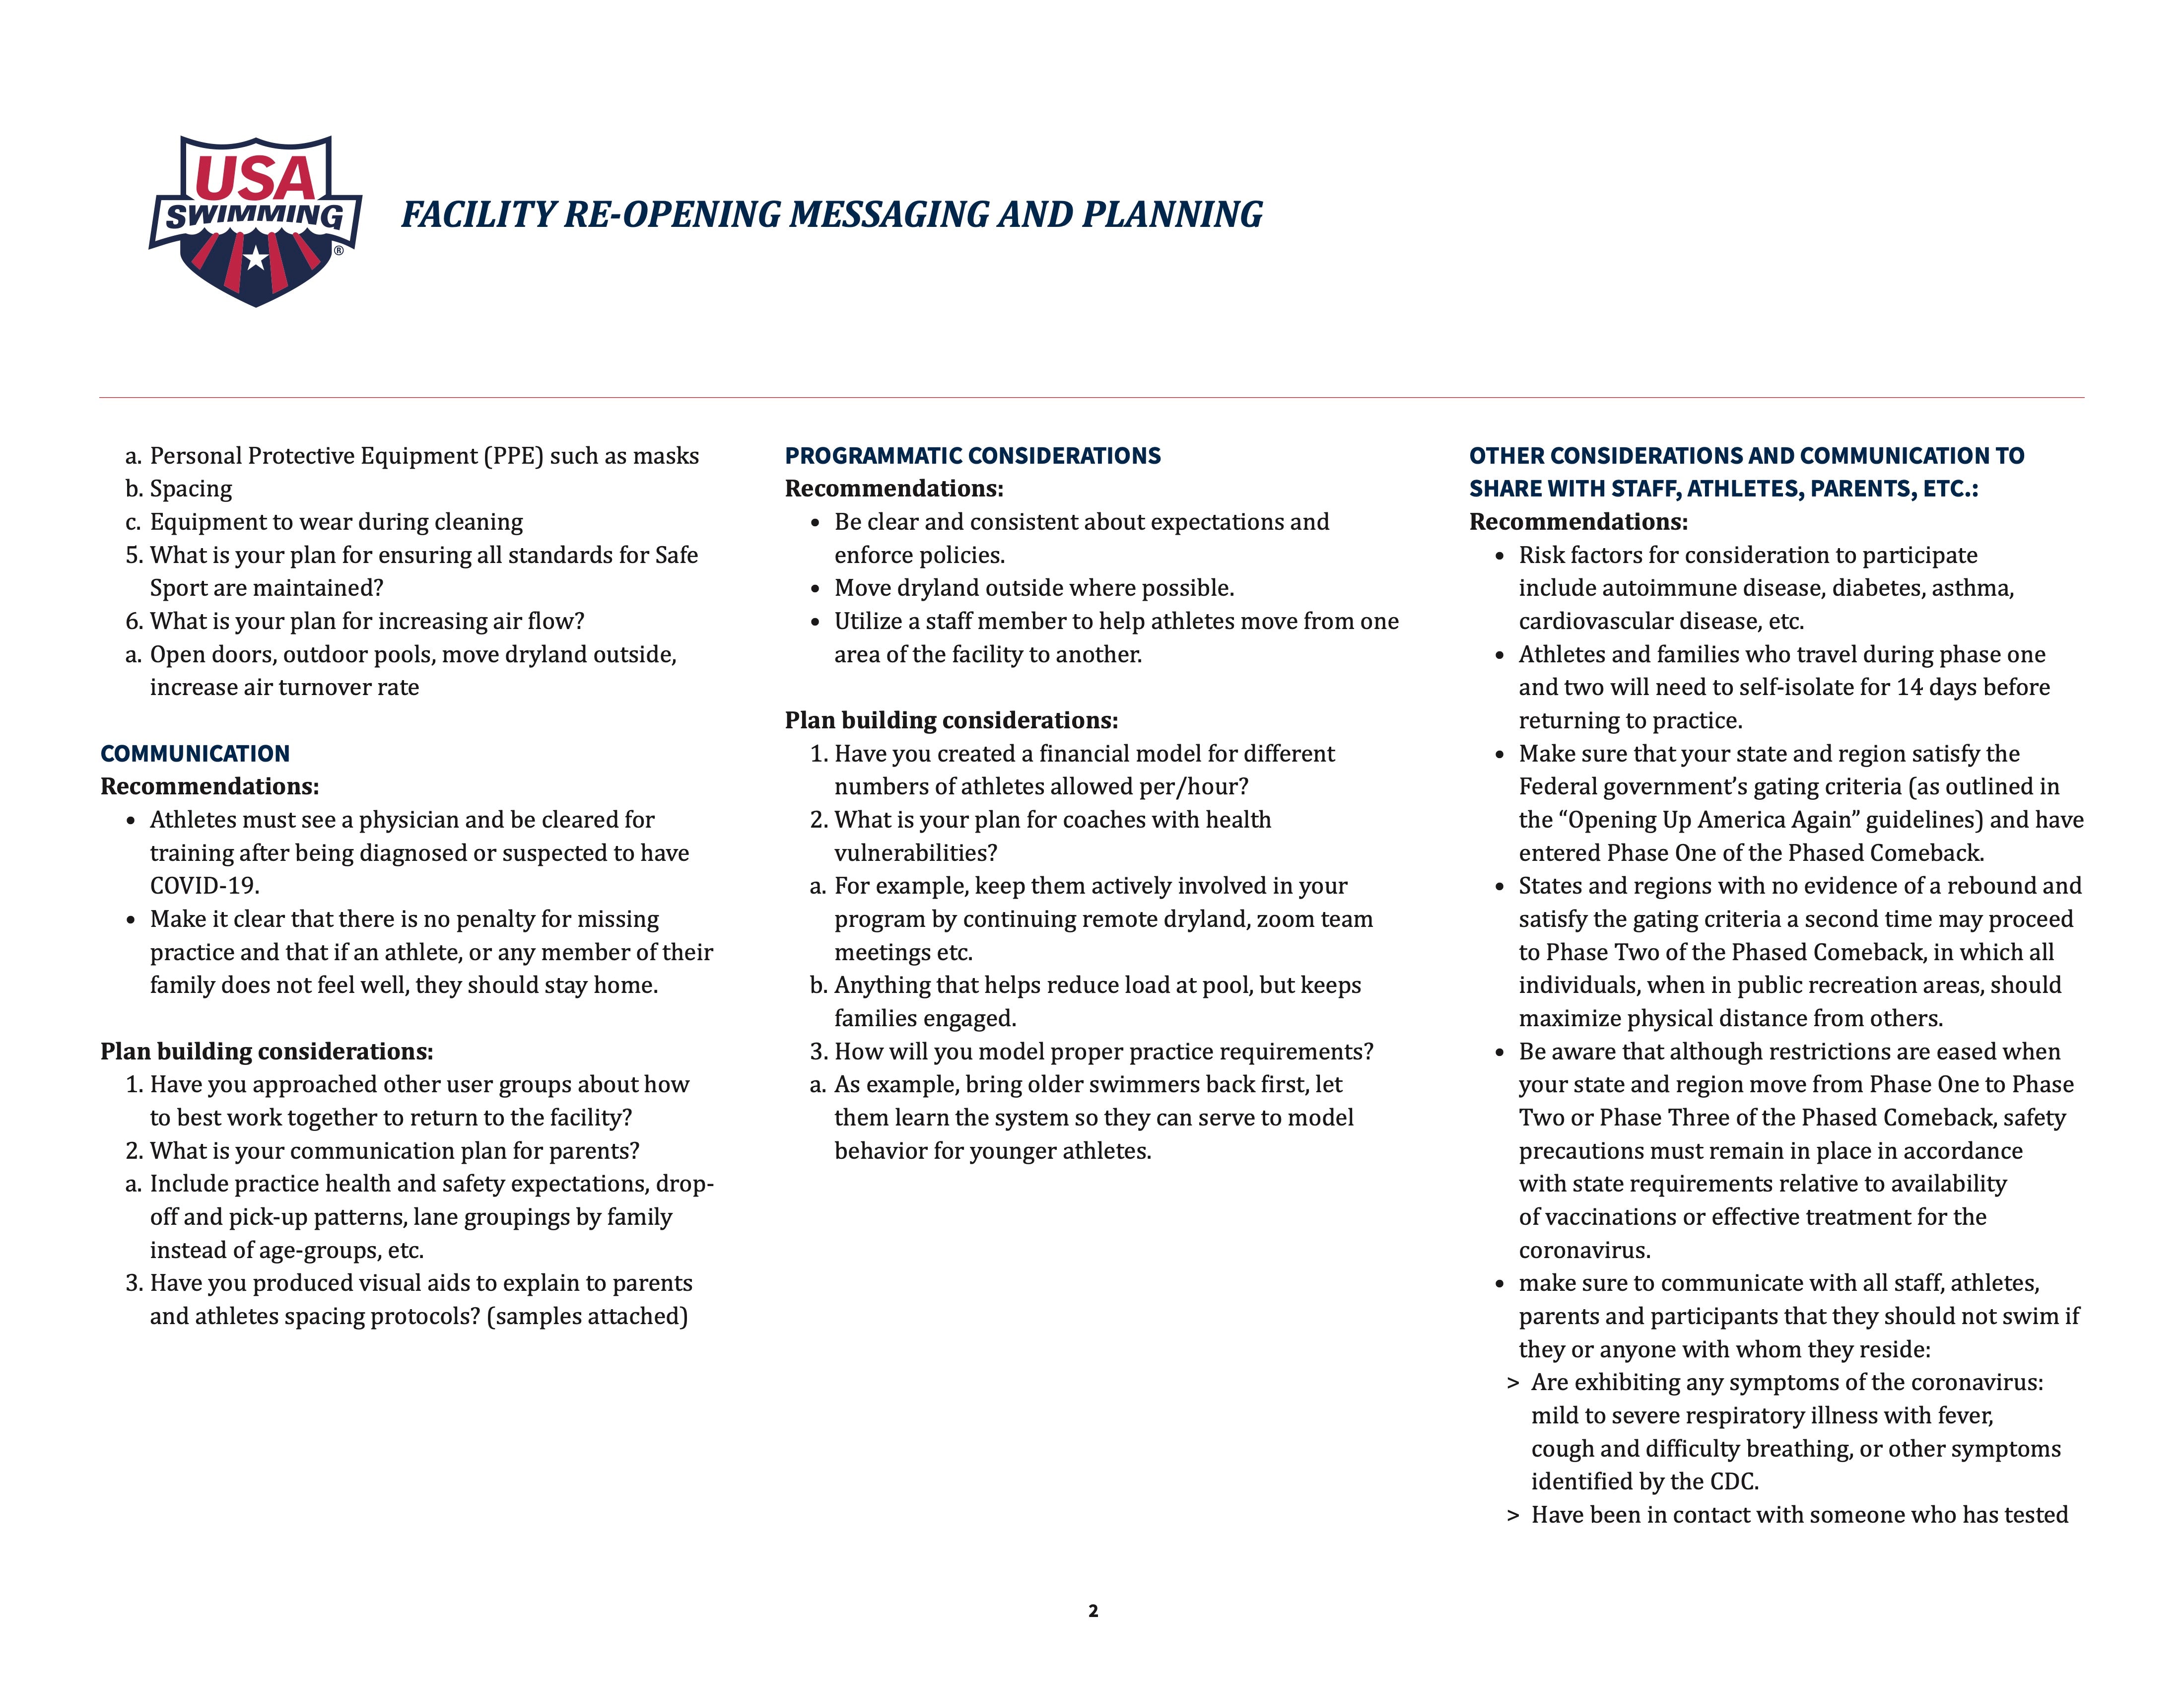 https://www.usaswimming.org/docs/default-source/coaching-resourcesdocuments/covid-19-team-resources/facility-reopening-plan-guidelines.pdf